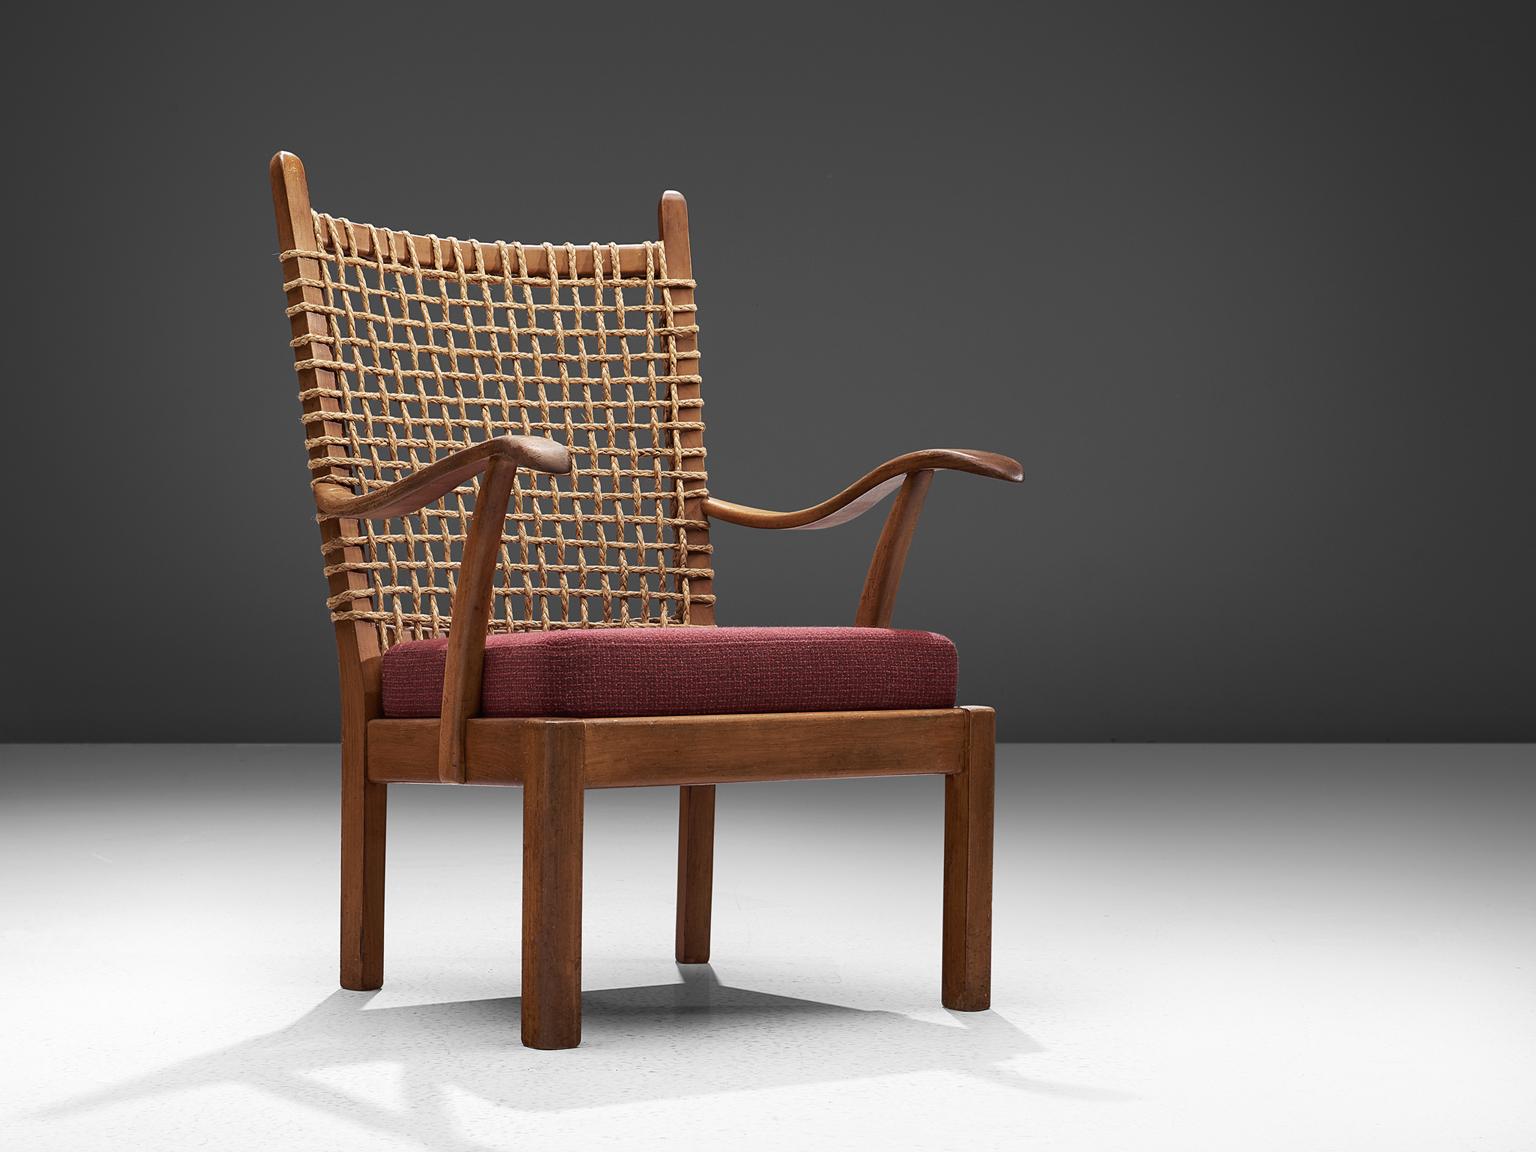 Dutch armchair, oak and cane, the Netherlands, 1940s.

This robust Dutch chair originates from the late 1940s. The seat is make of oak and back is made of woven cane.. This natural, robust style is typical for design of the 1940s by Bas van Pelt,